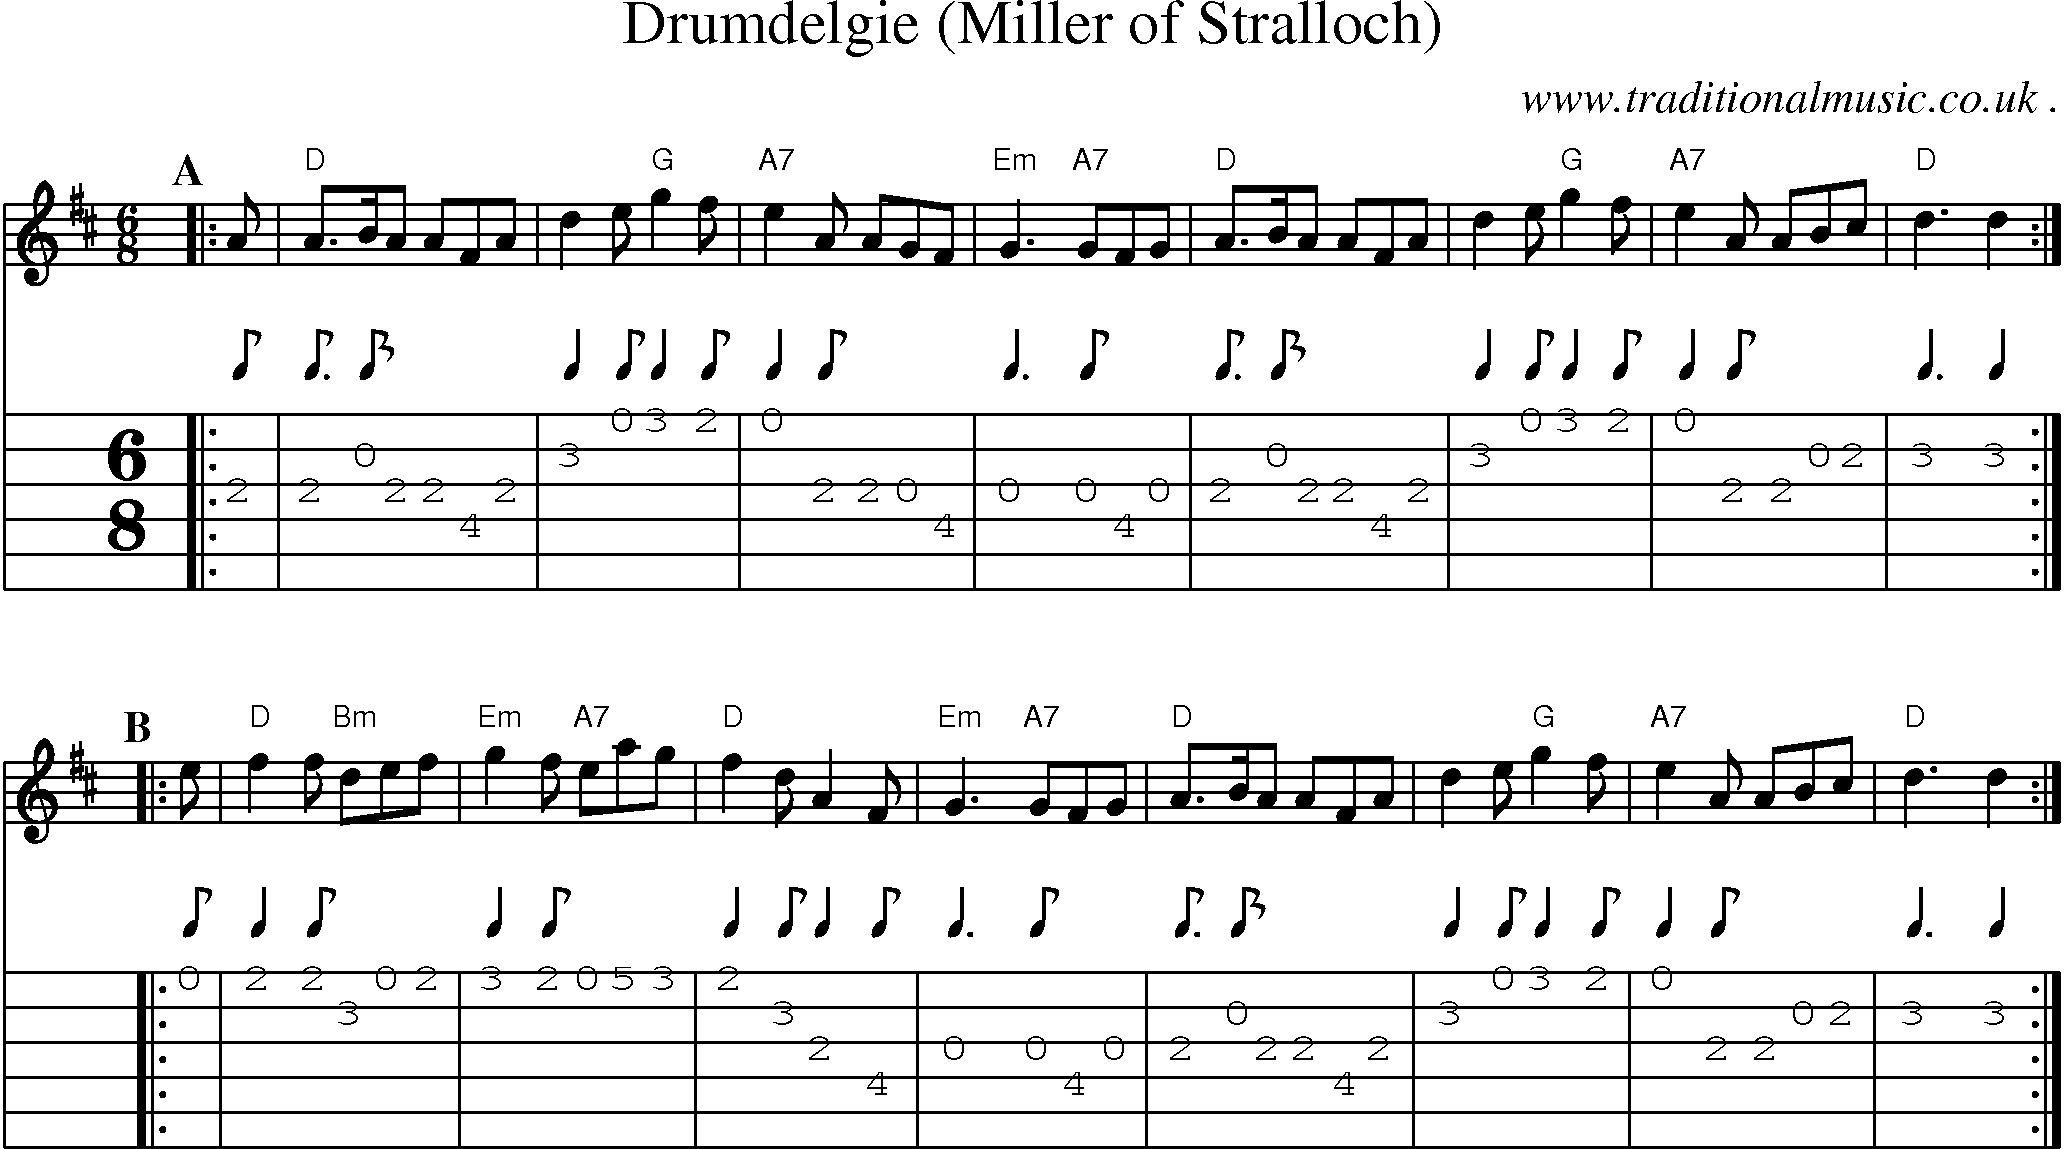 Sheet-music  score, Chords and Guitar Tabs for Drumdelgie Miller Of Stralloch